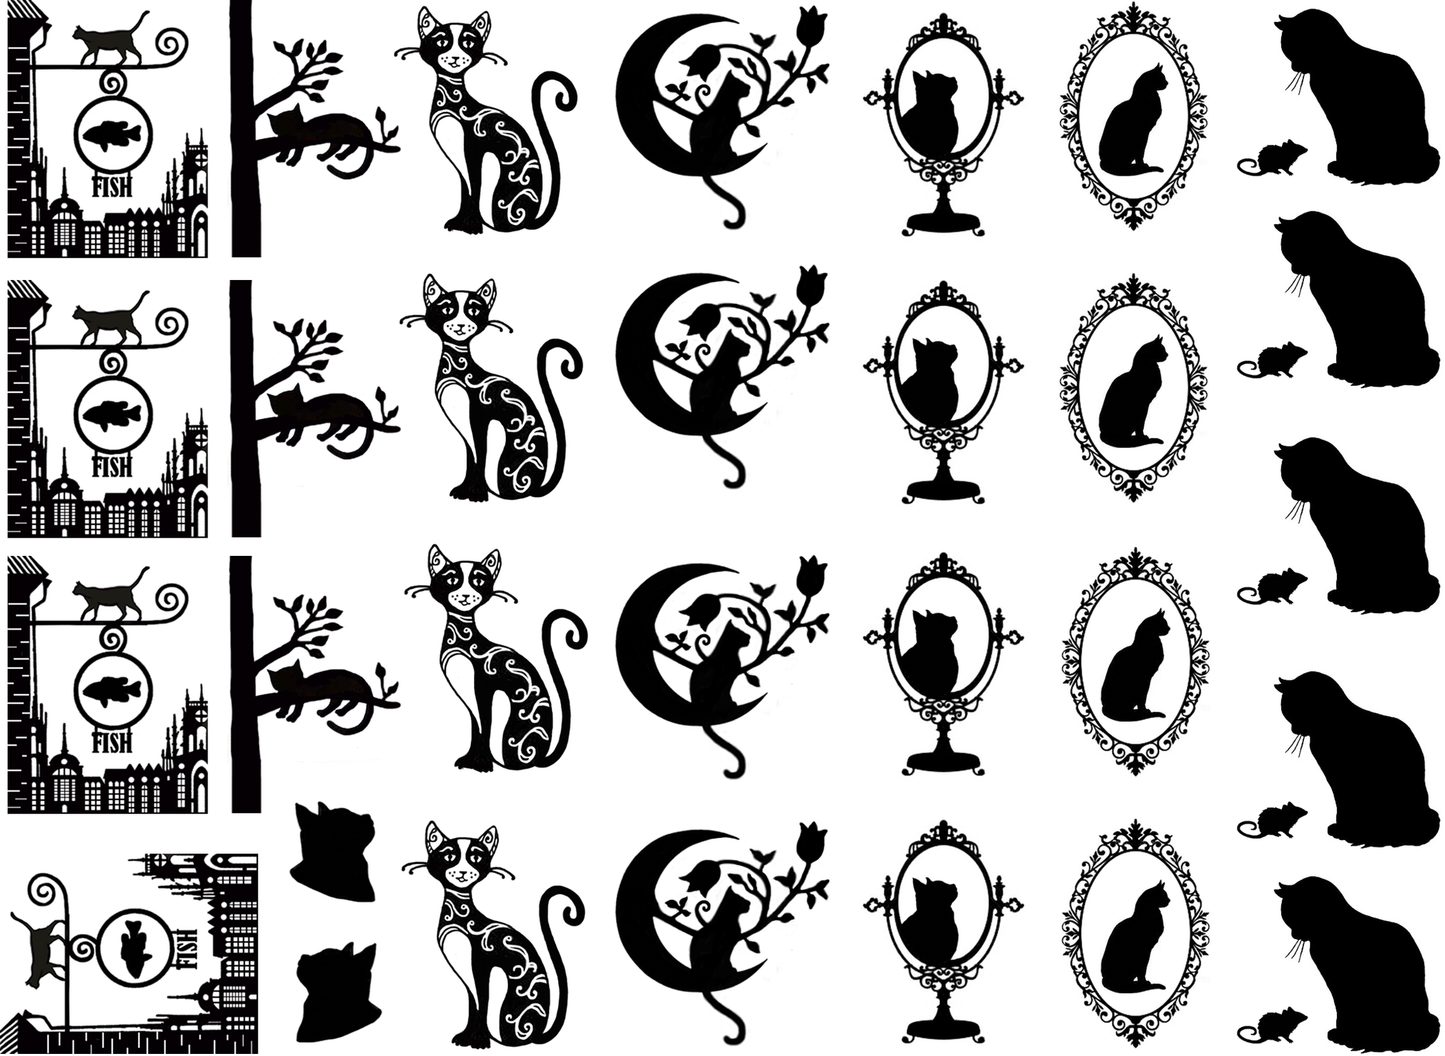 Cats on Parade 30 pcs 1/2" to 1-1/4"  Black Fused Glass Decals